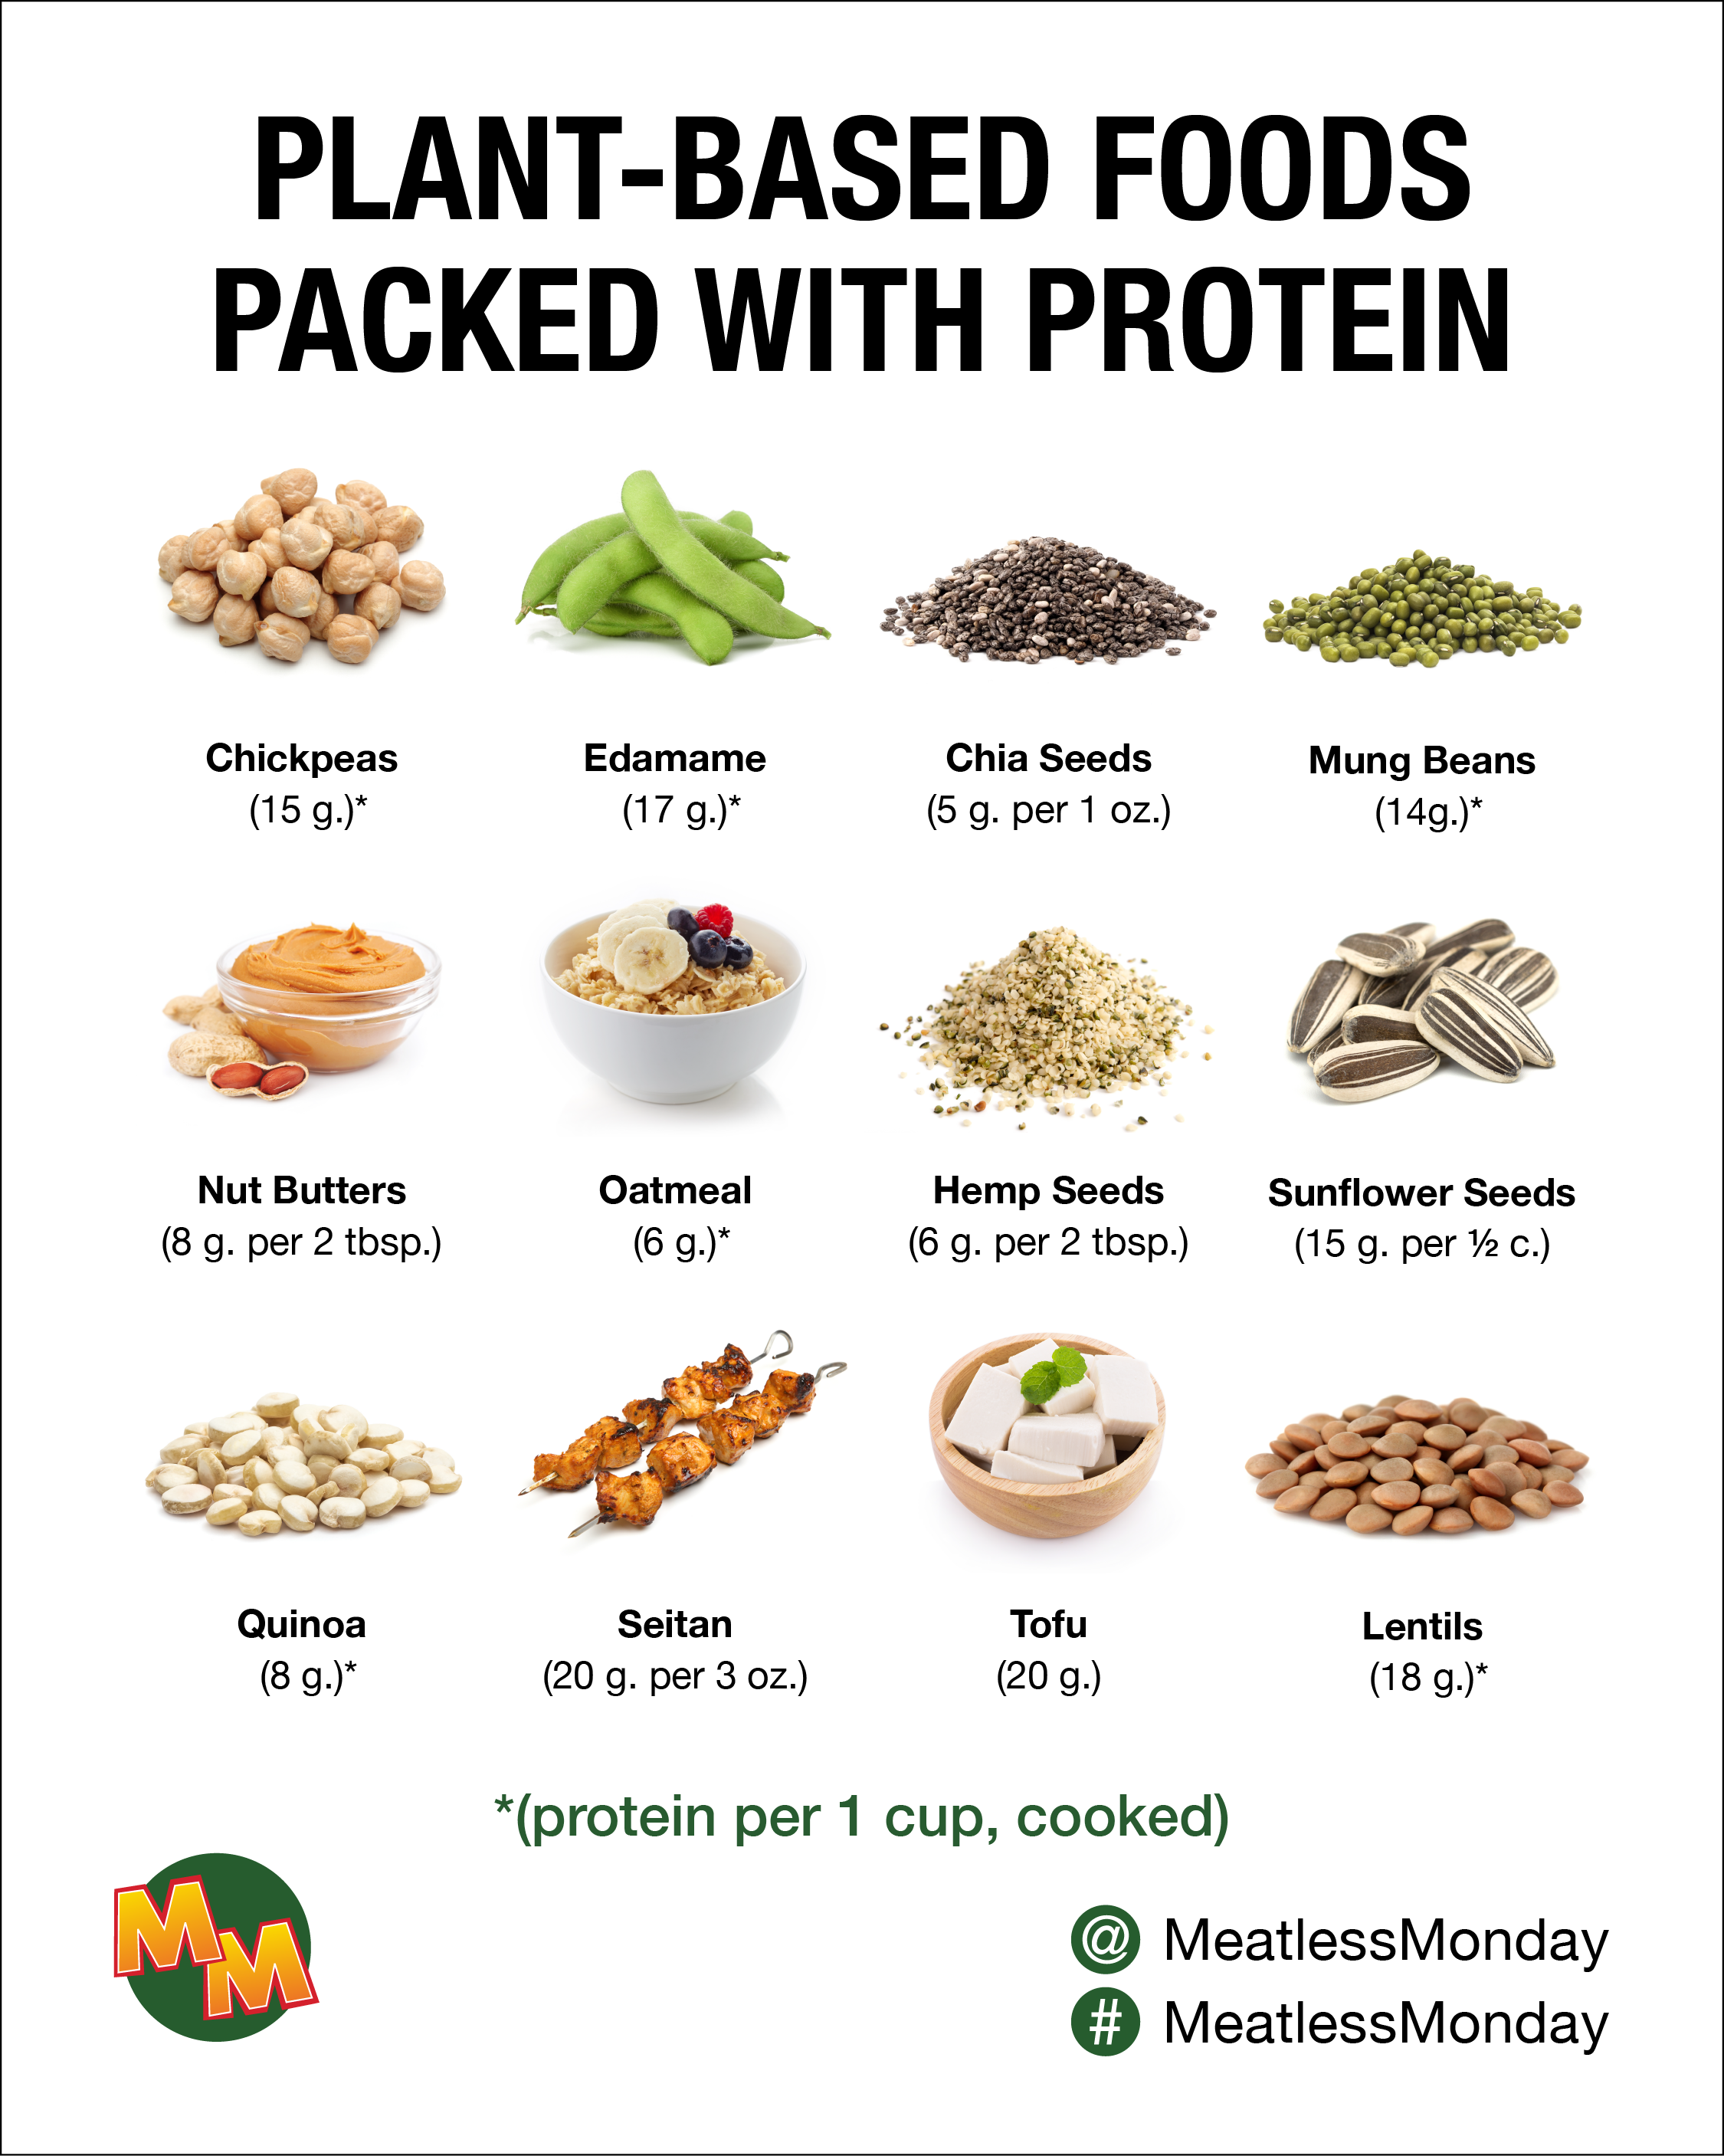 https://www.mondaycampaigns.org/wp-content/uploads/2022/09/meatless-monday-infographic-food-packed-with-protein.png